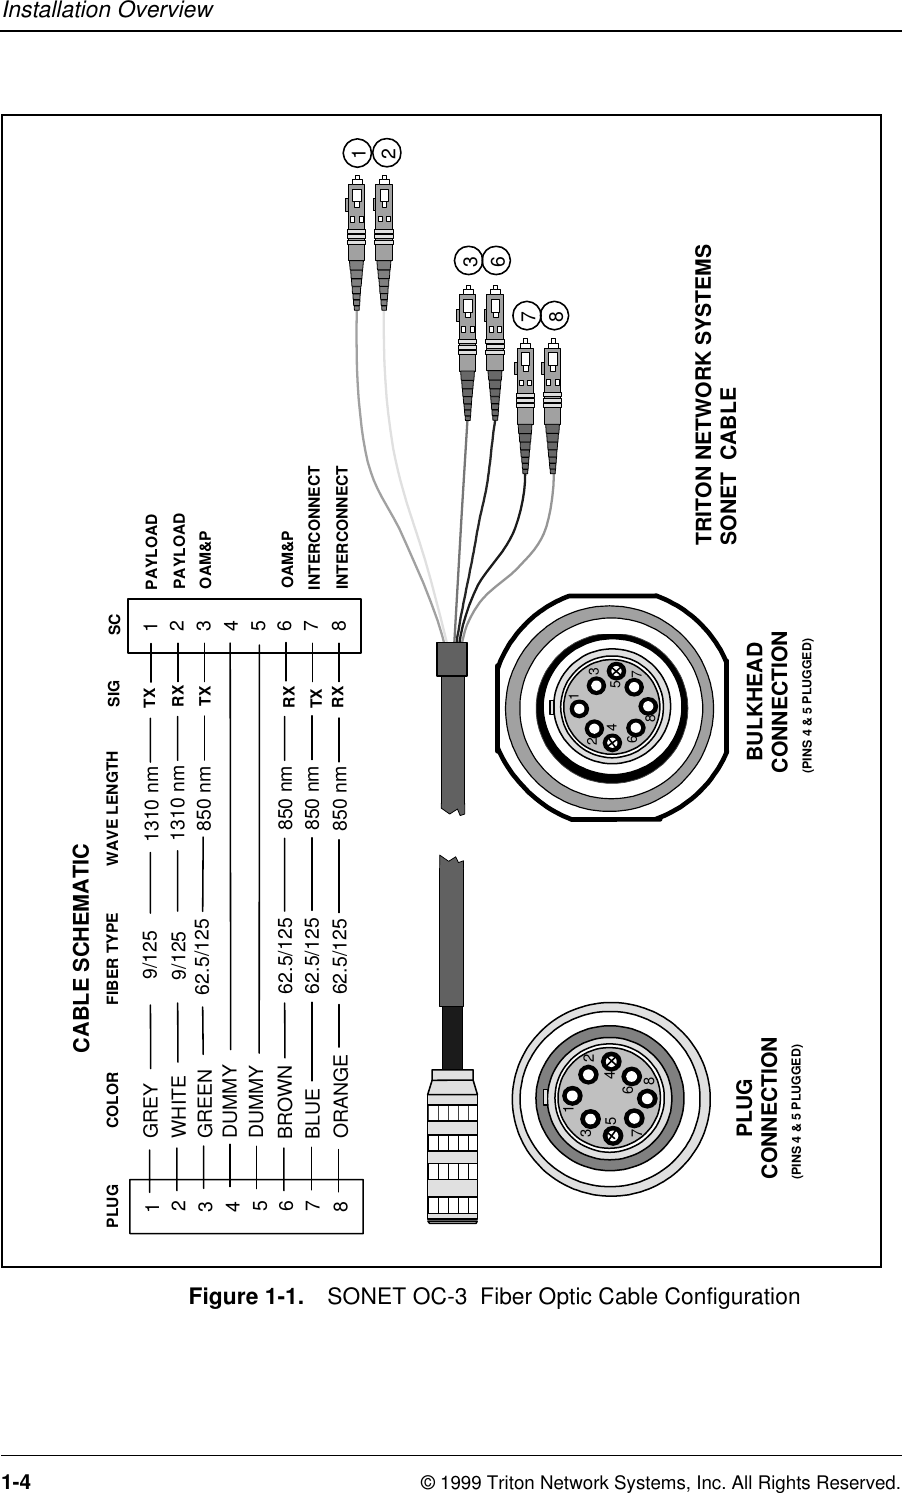 Installation Overview1-4 © 1999 Triton Network Systems, Inc. All Rights Reserved.Figure 1-1. SONET OC-3  Fiber Optic Cable Configuration1234568712345687       PLUGCONNECTION  BULKHEADCONNECTIONCABLE SCHEMATICTRITON NETWORK SYSTEMSSONET  CABLEBLUE     9/1251310 nm1WHITE62.5/125  850 nm8ORANGE     9/1251310 nm23DUMMY4DUMMY5BROWN62.5/125  850 nm6GREY62.5/125  850 nm7PLUGCOLORFIBER TYPEWAVE LENGTH123678(PINS 4 &amp; 5 PLUGGED)(PINS 4 &amp; 5 PLUGGED)GREEN62.5/125  850 nm18234567SCSIGTXTXTXRXRXRXPAYLOADPAYLOADOAM&amp;POAM&amp;PINTERCONNECTINTERCONNECT